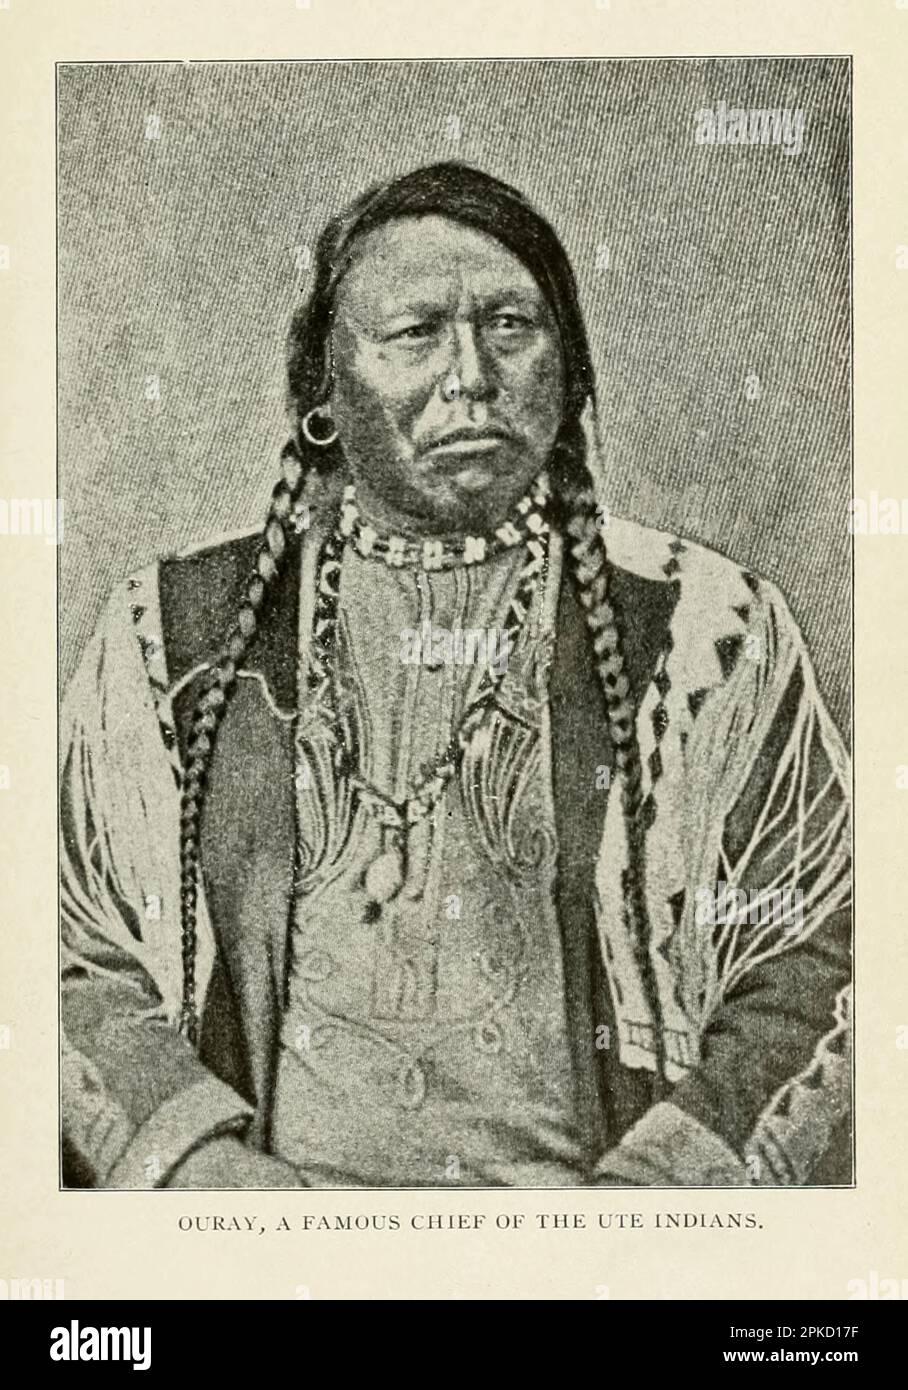 Ouray, a famous chief of the Ute Indians from the book ' Colorado, the queen jewel of the Rockies ' by Mae Lacy Baggs, Publication date 1918 Publisher Boston, The Page company part od the ' See America First ' Series Stock Photo